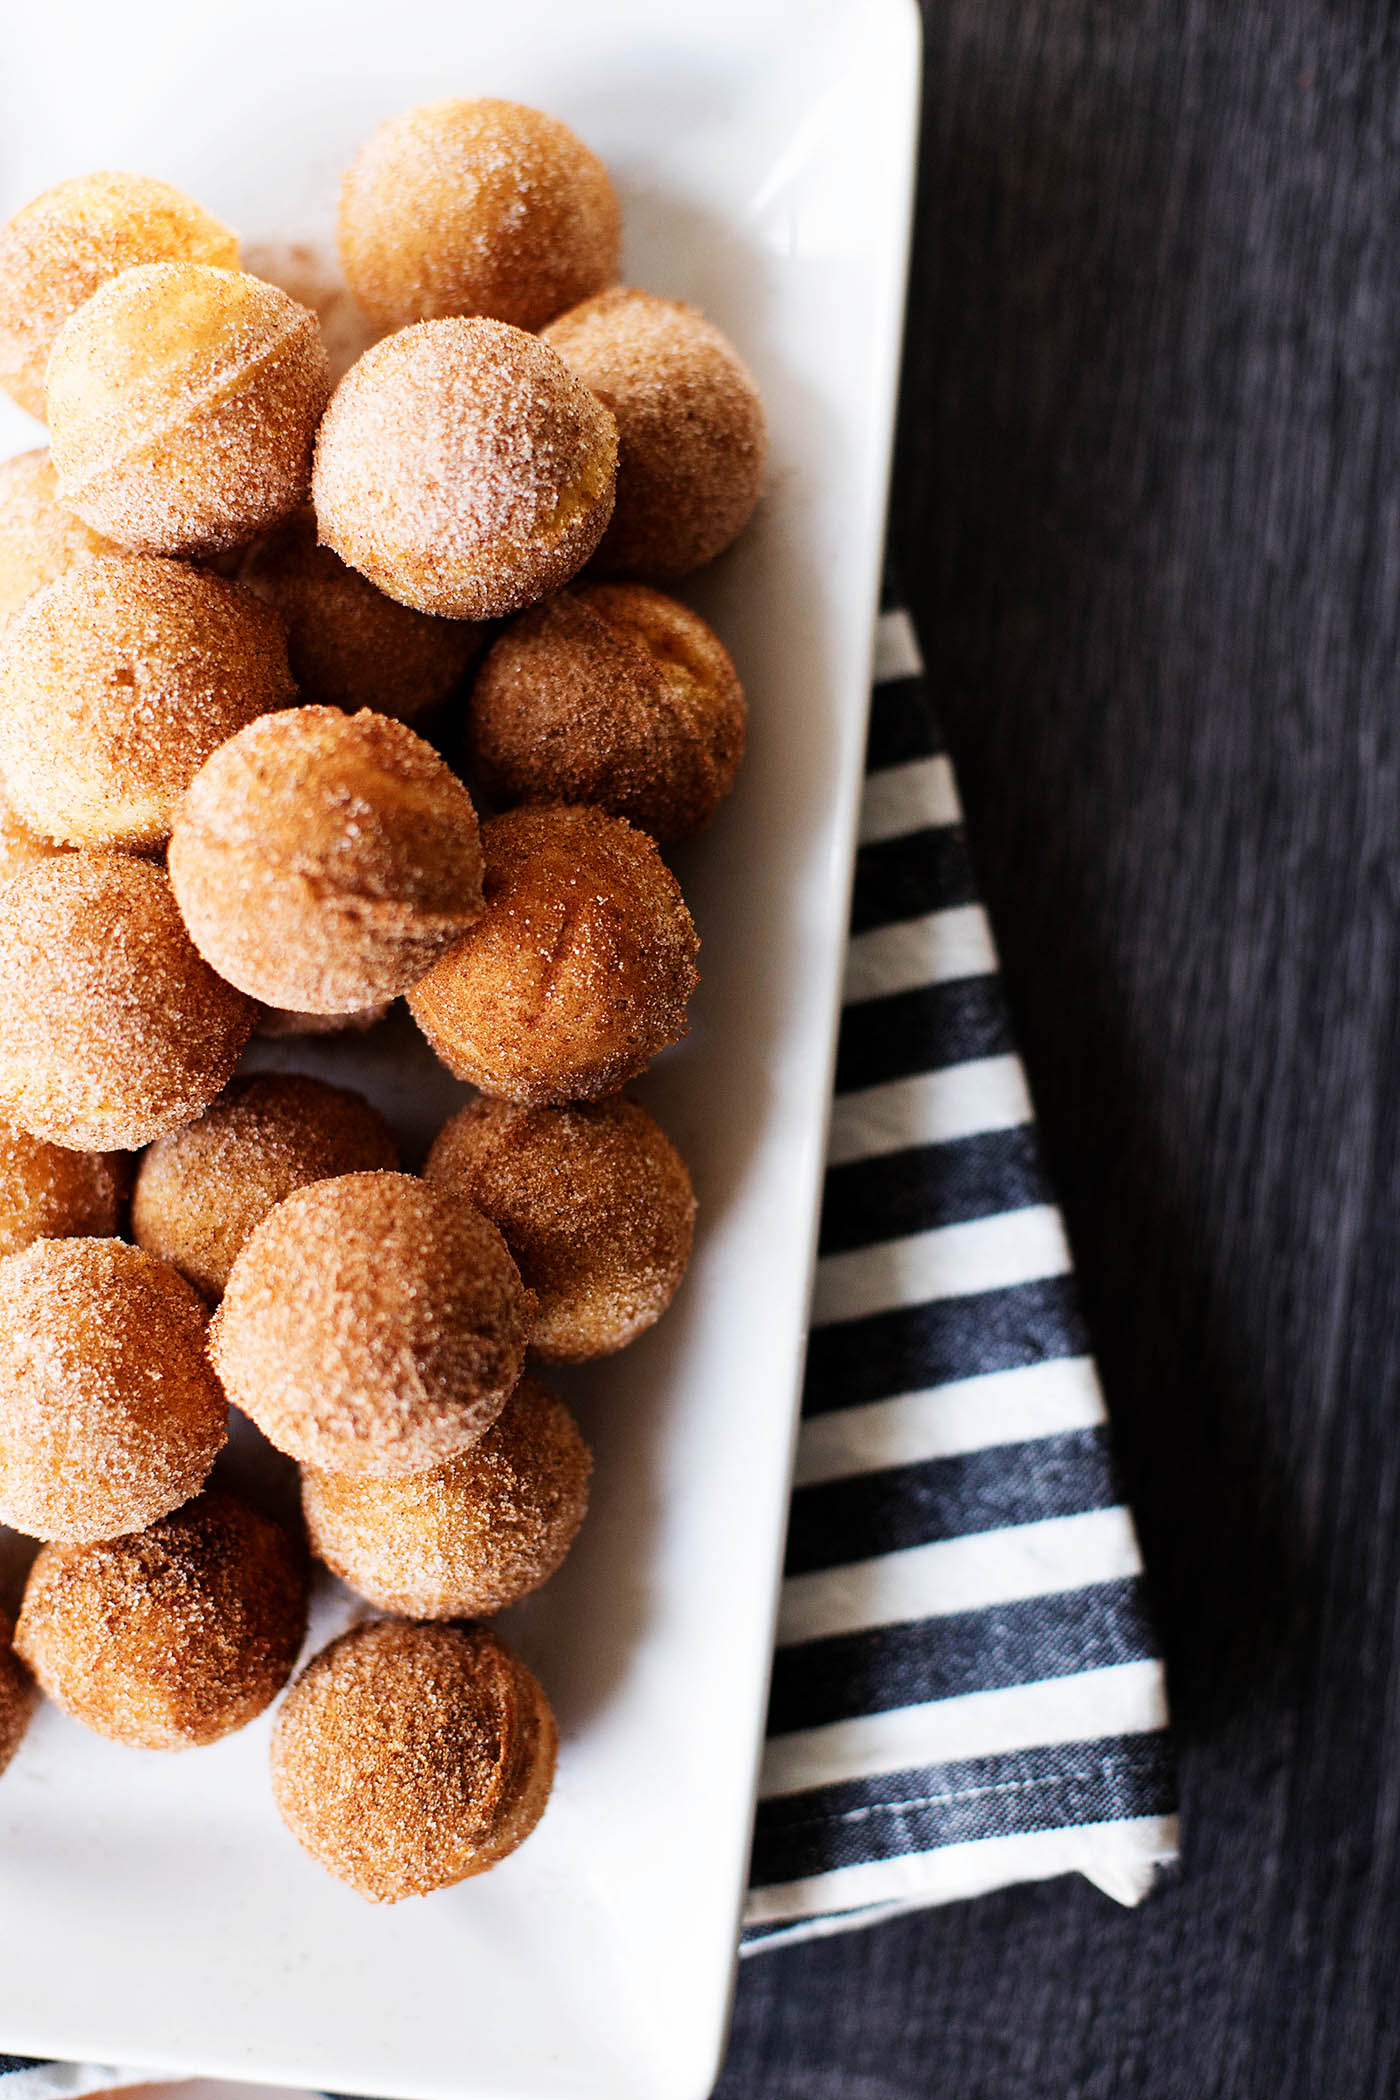 Easy baked eggnog donut holes! These can easily be make gluten free too (the ones pictured are gluten free)